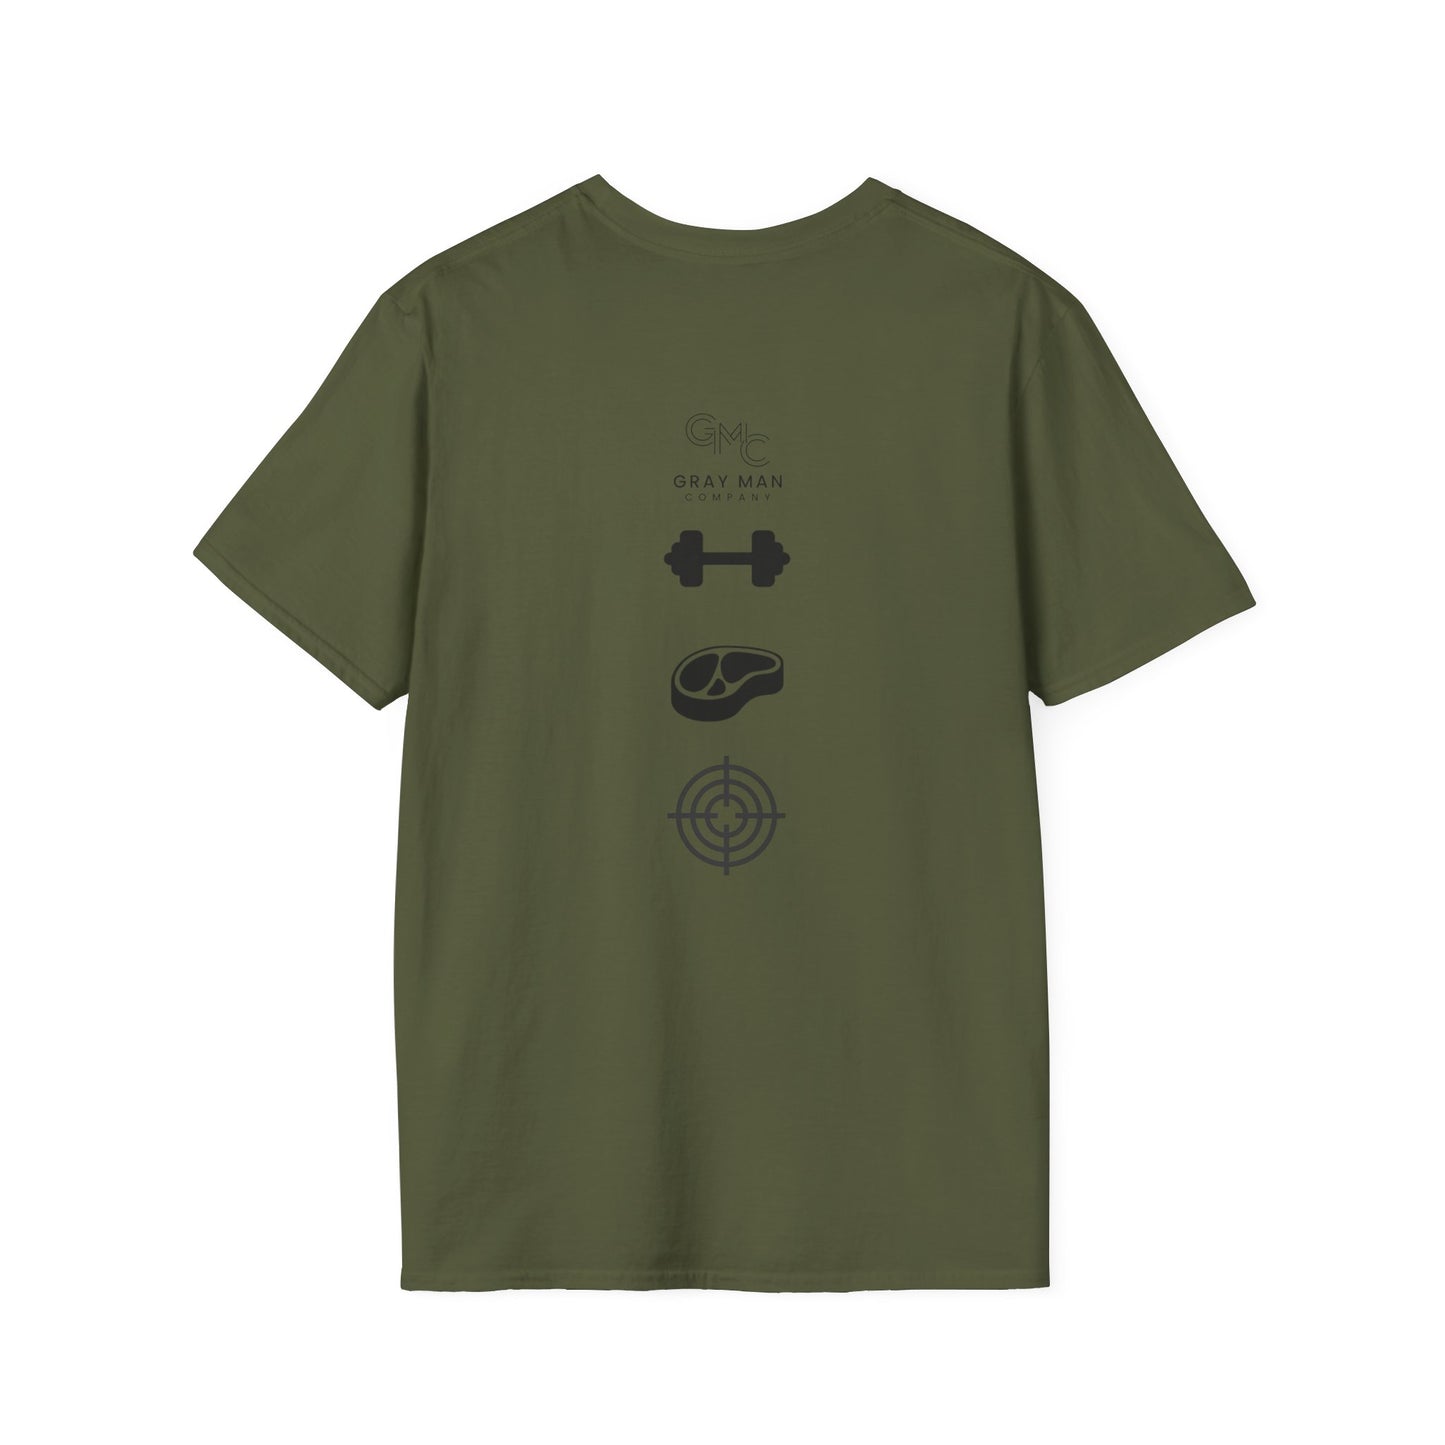 EDC Graphic T-Shirt - LIFT WEIGHTS, EAT STEAKS, SHOOT PLATES